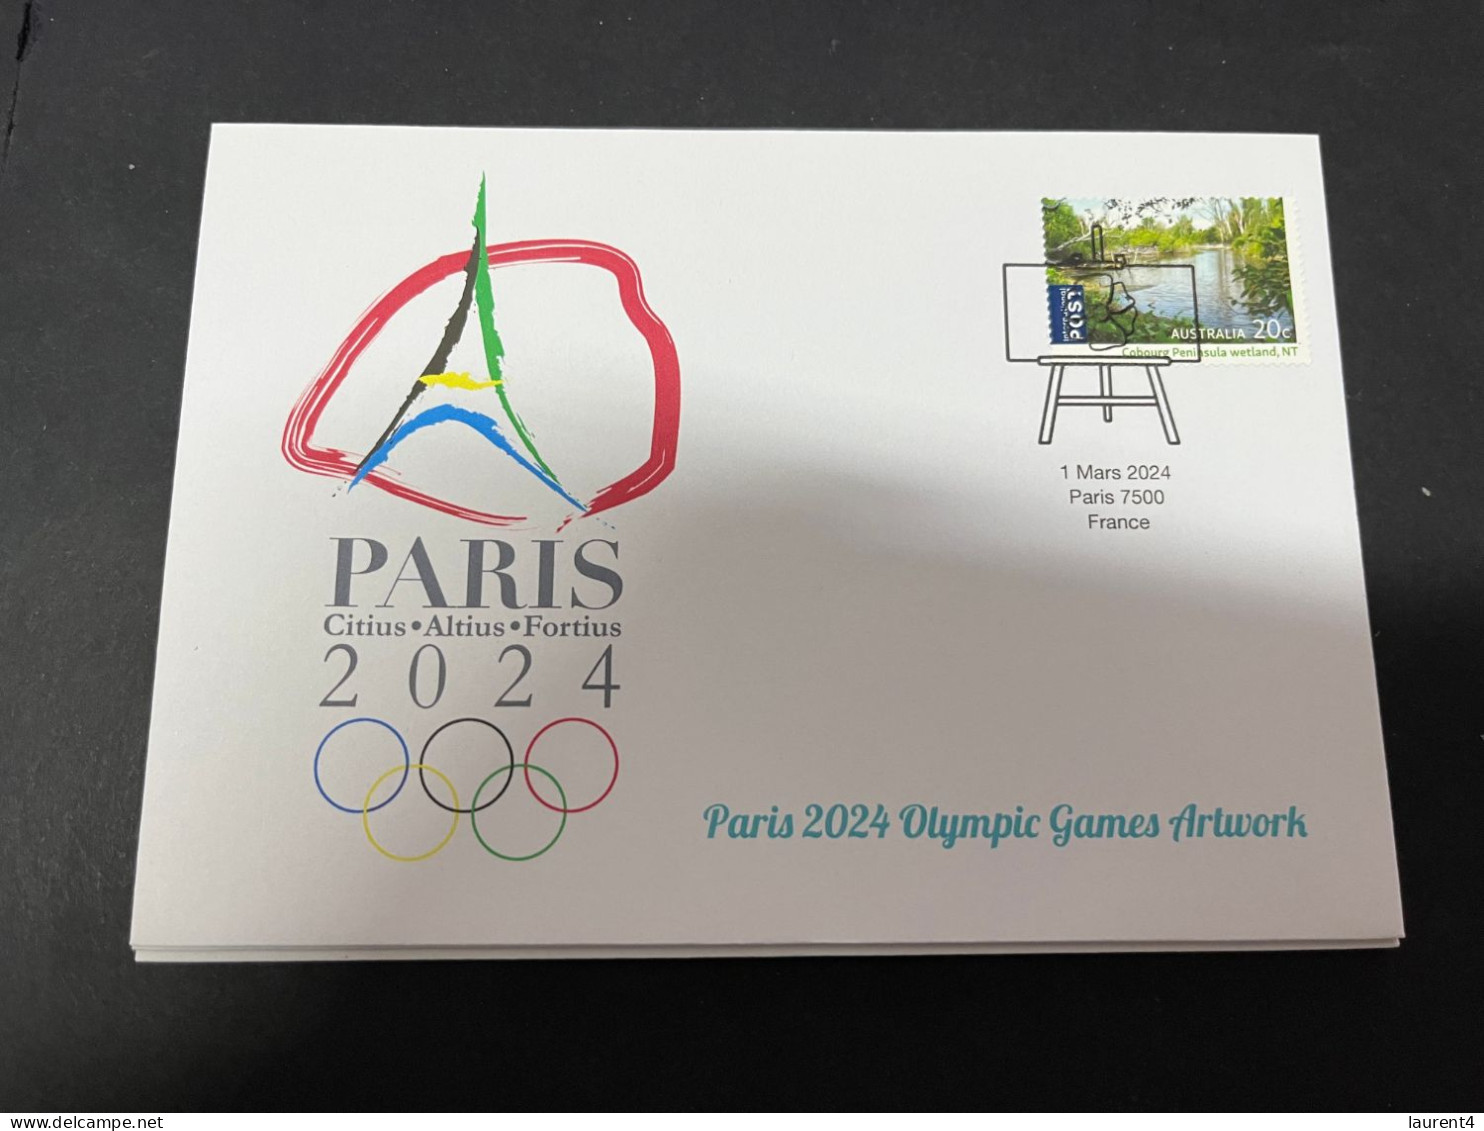 8-3-2024 (2 Y 30) Paris Olympic Games 2024 - 1 (of 12 Covers Series) For The Paris 2024 Olympic Games Artwork - Eté 2024 : Paris